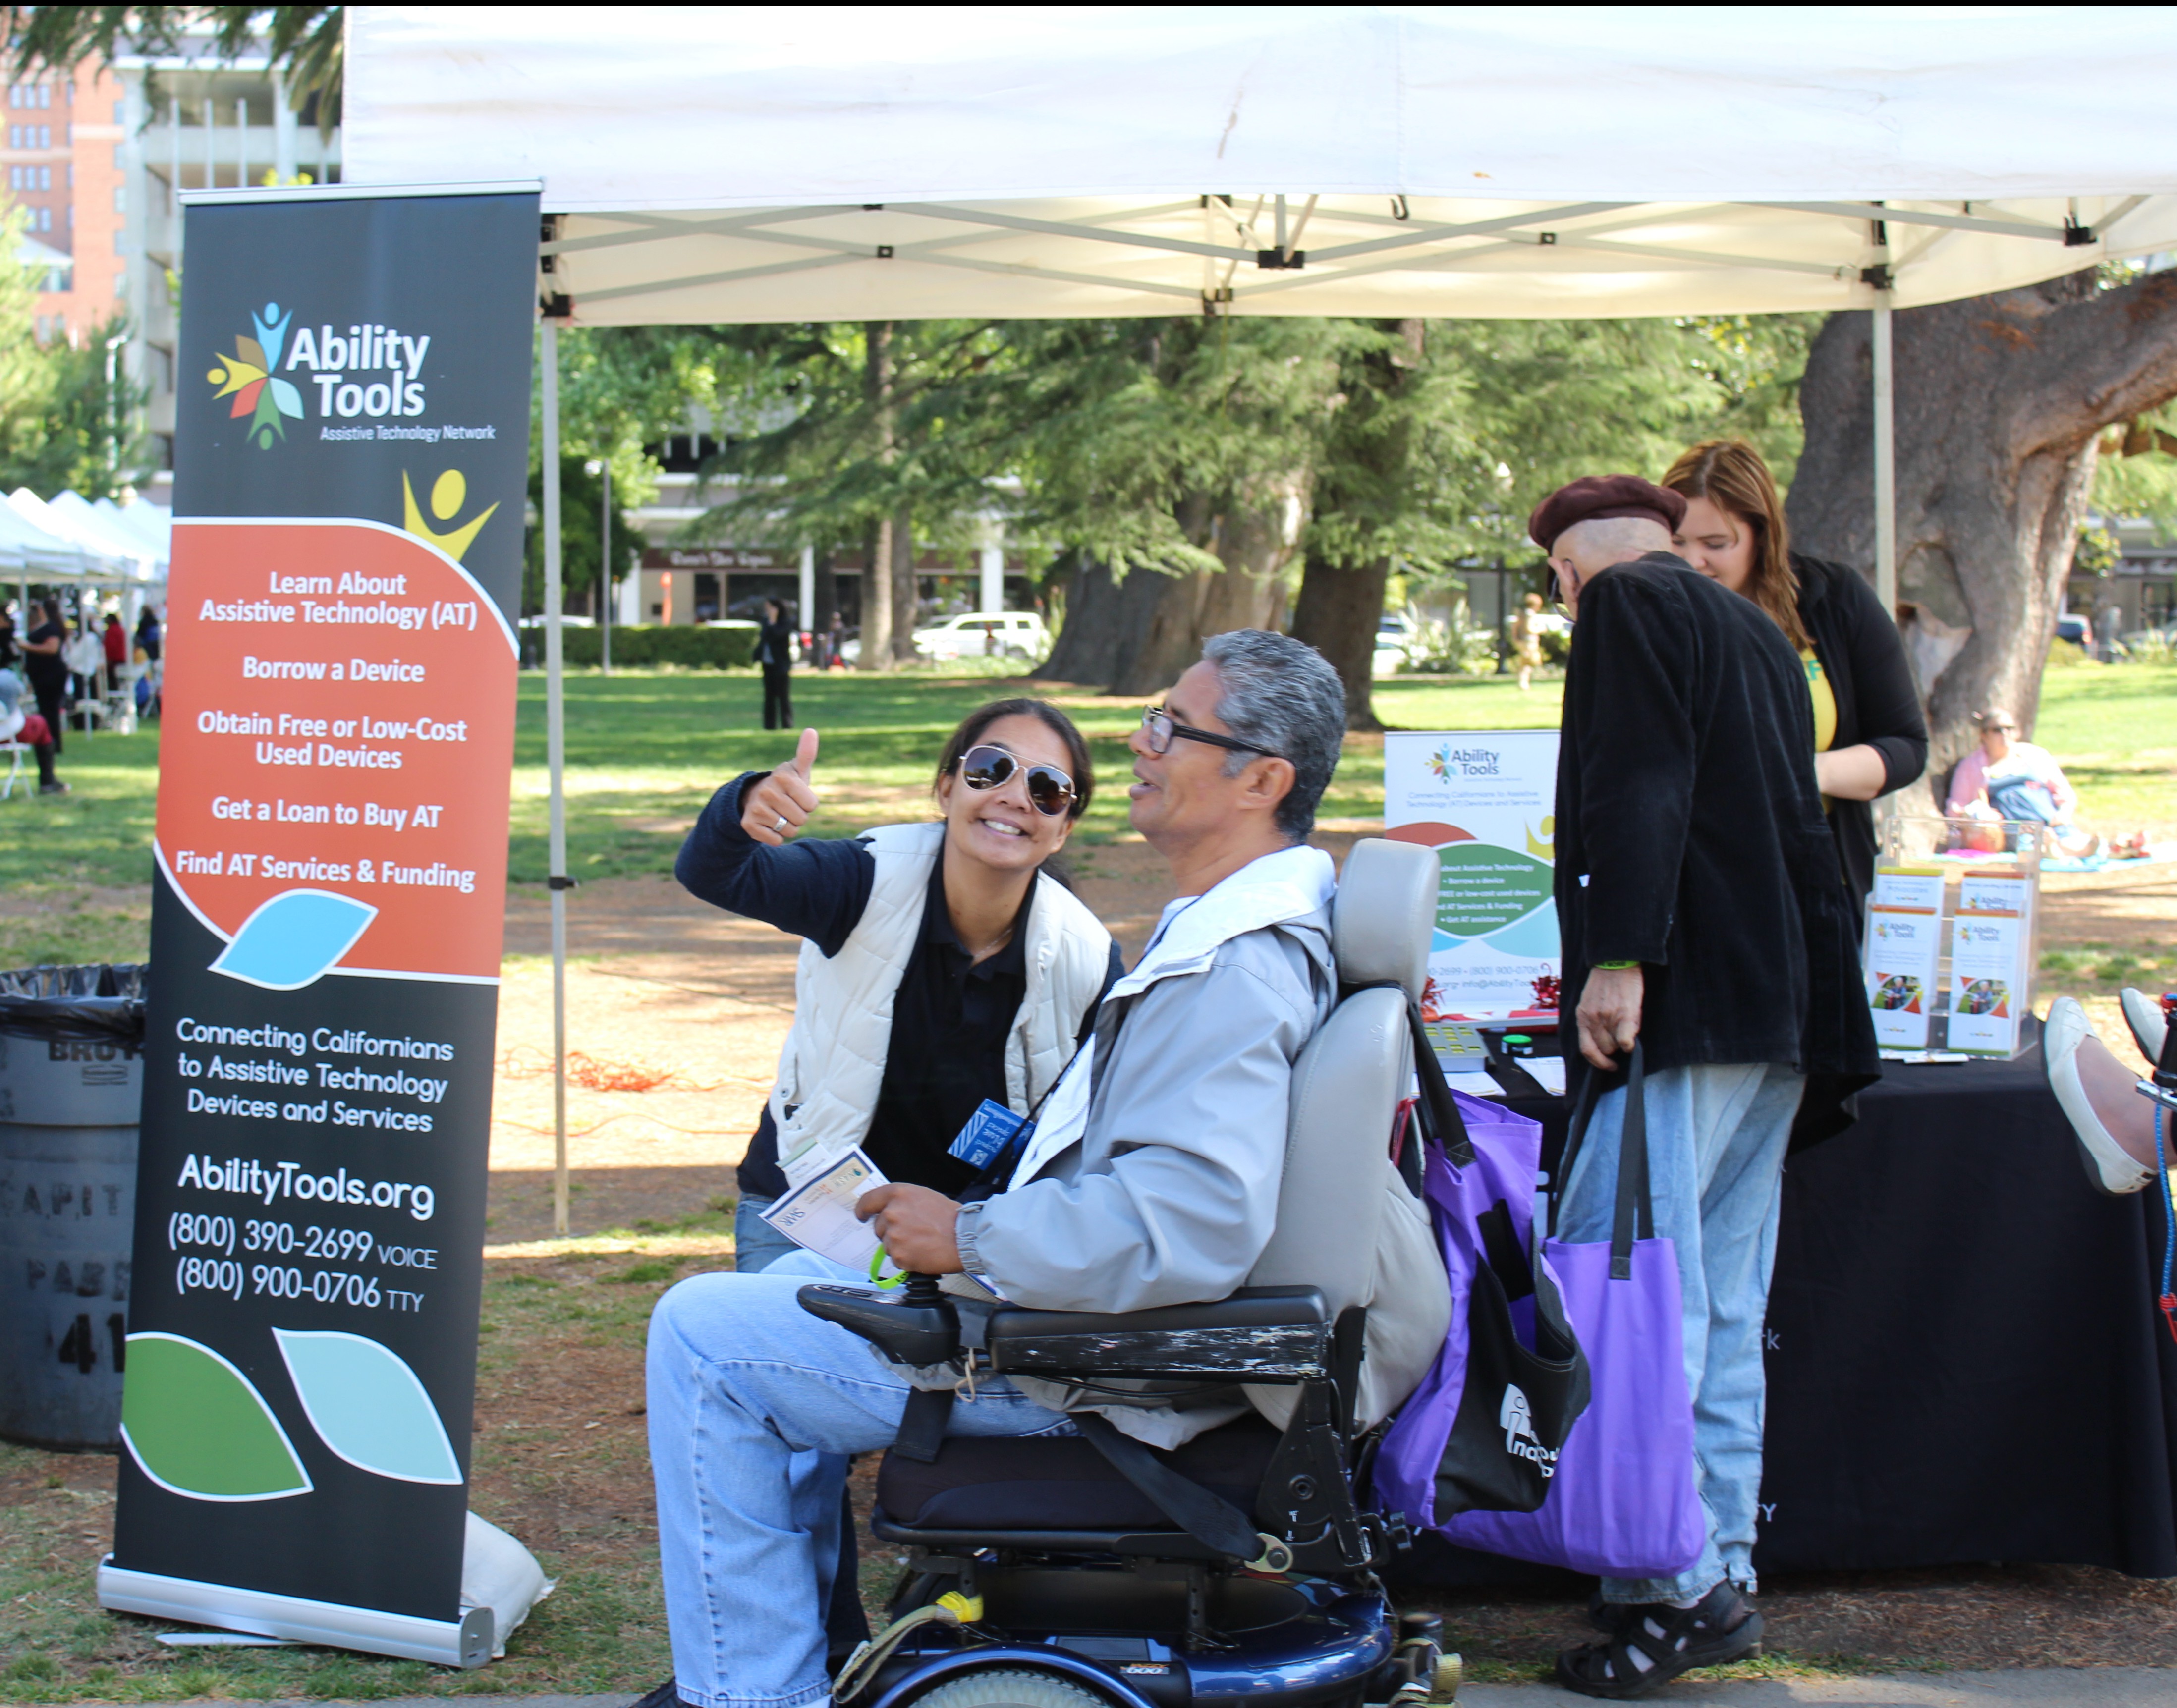 Women with sunglasses giving the photographer a thumbs up while she speaks with a man in a power chair in front of the Ability Tools booth 